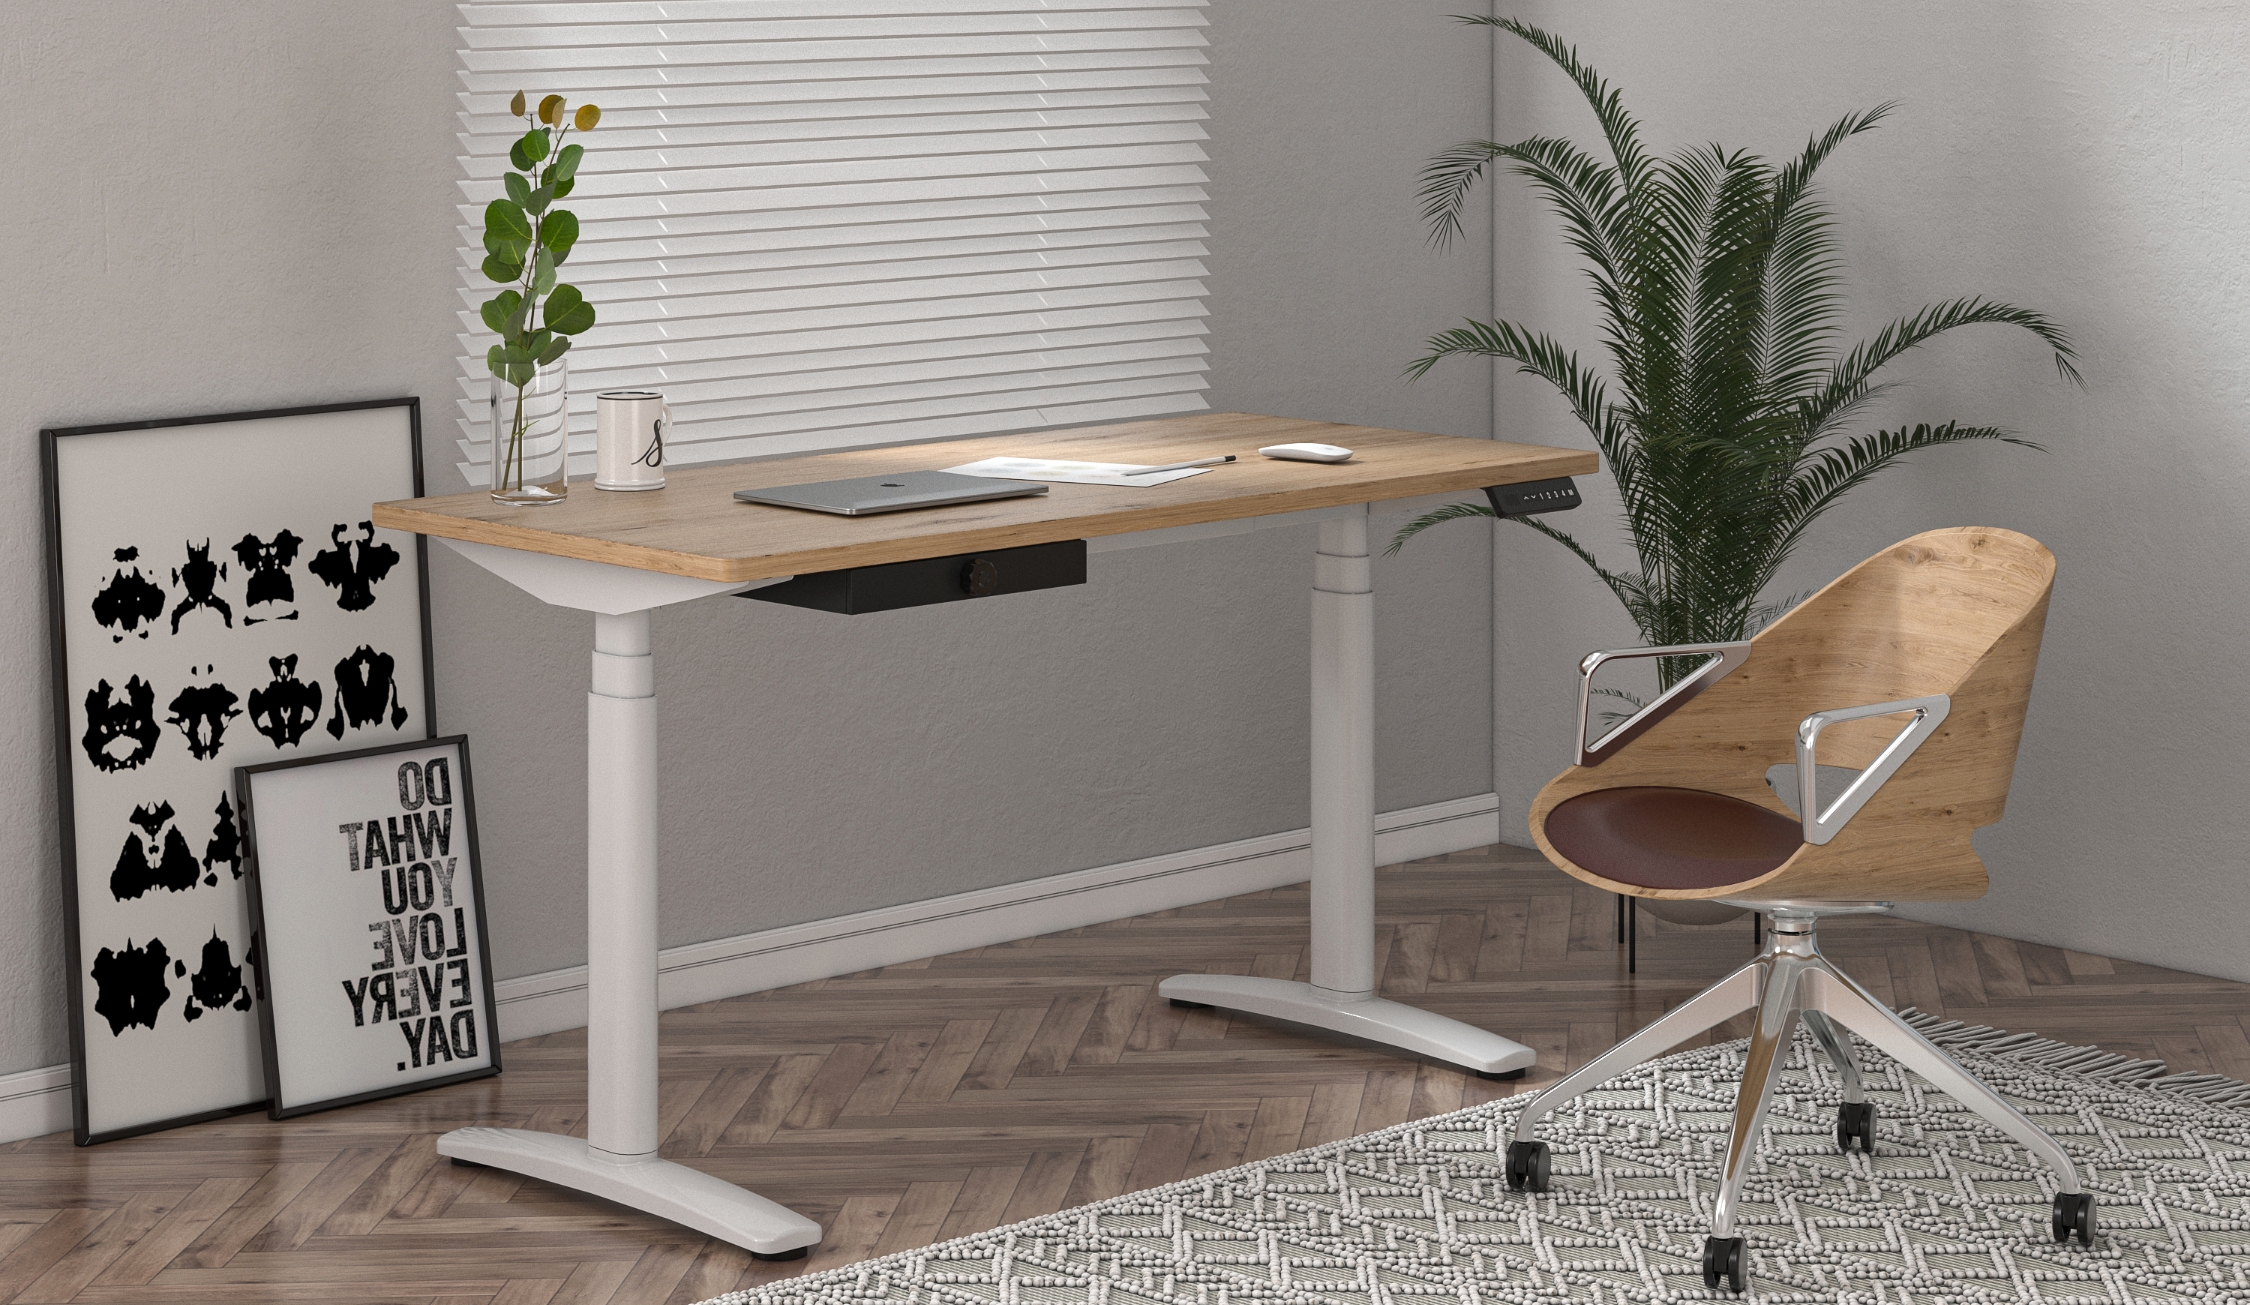 How To Choose The Right Height Adjustable Table for Your Workspace?